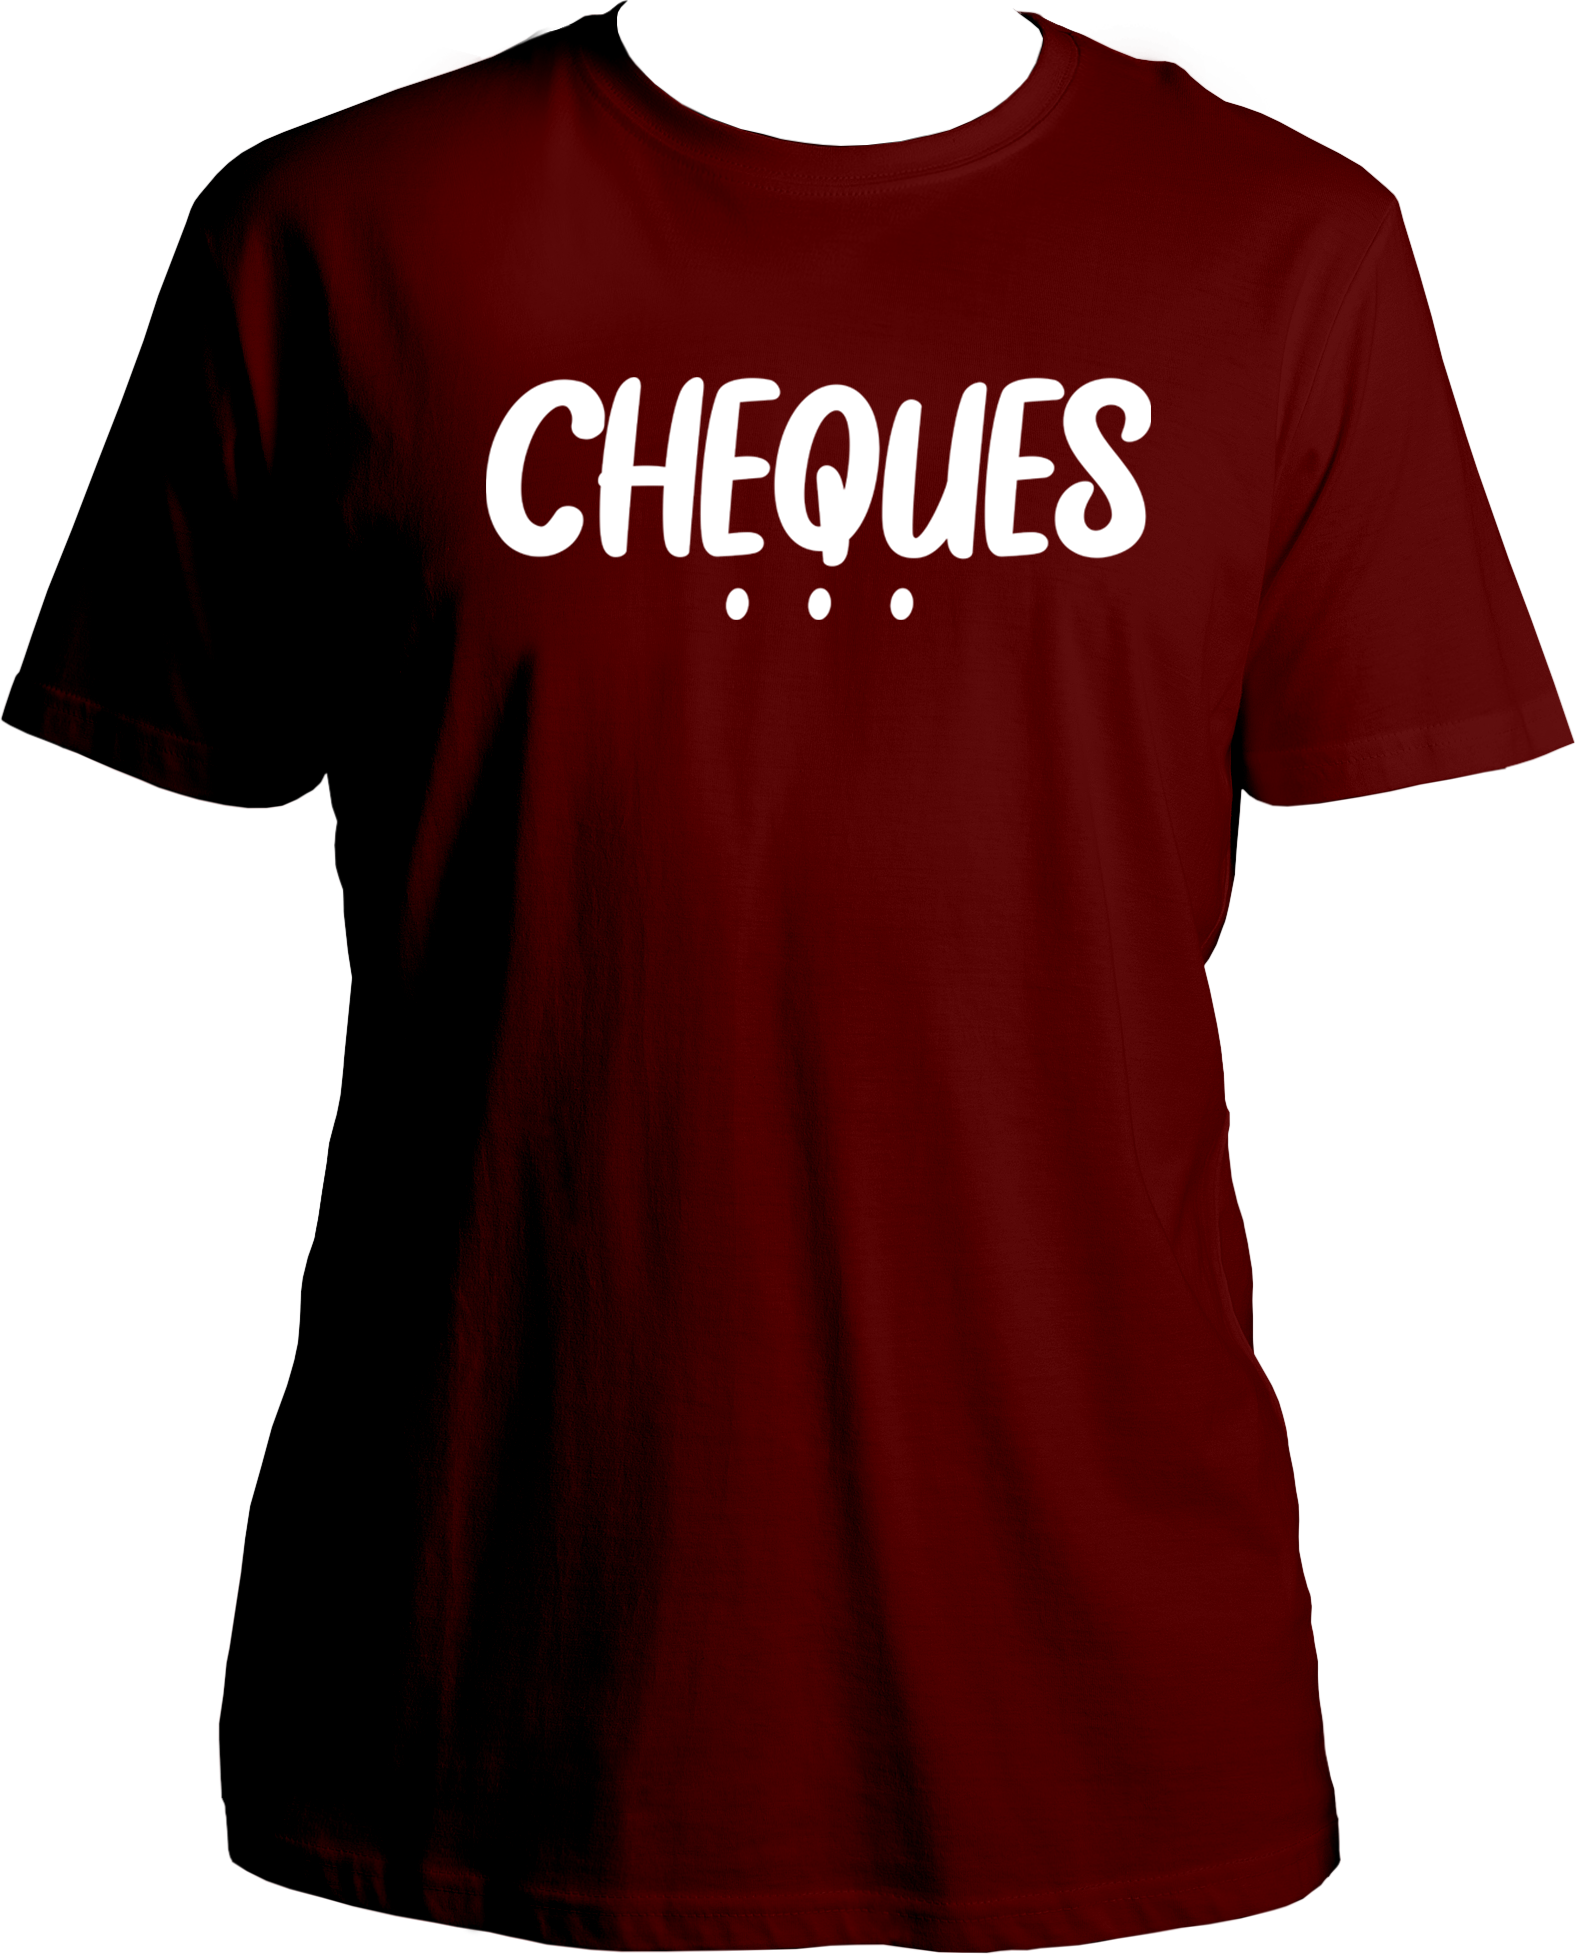 For fans of Punjabi songs and text t-shirts, this is a steal deal you don't want to miss. The "CHEQUES" tee is more than just lyrics on fabric—it's a piece of musical history you can wear.